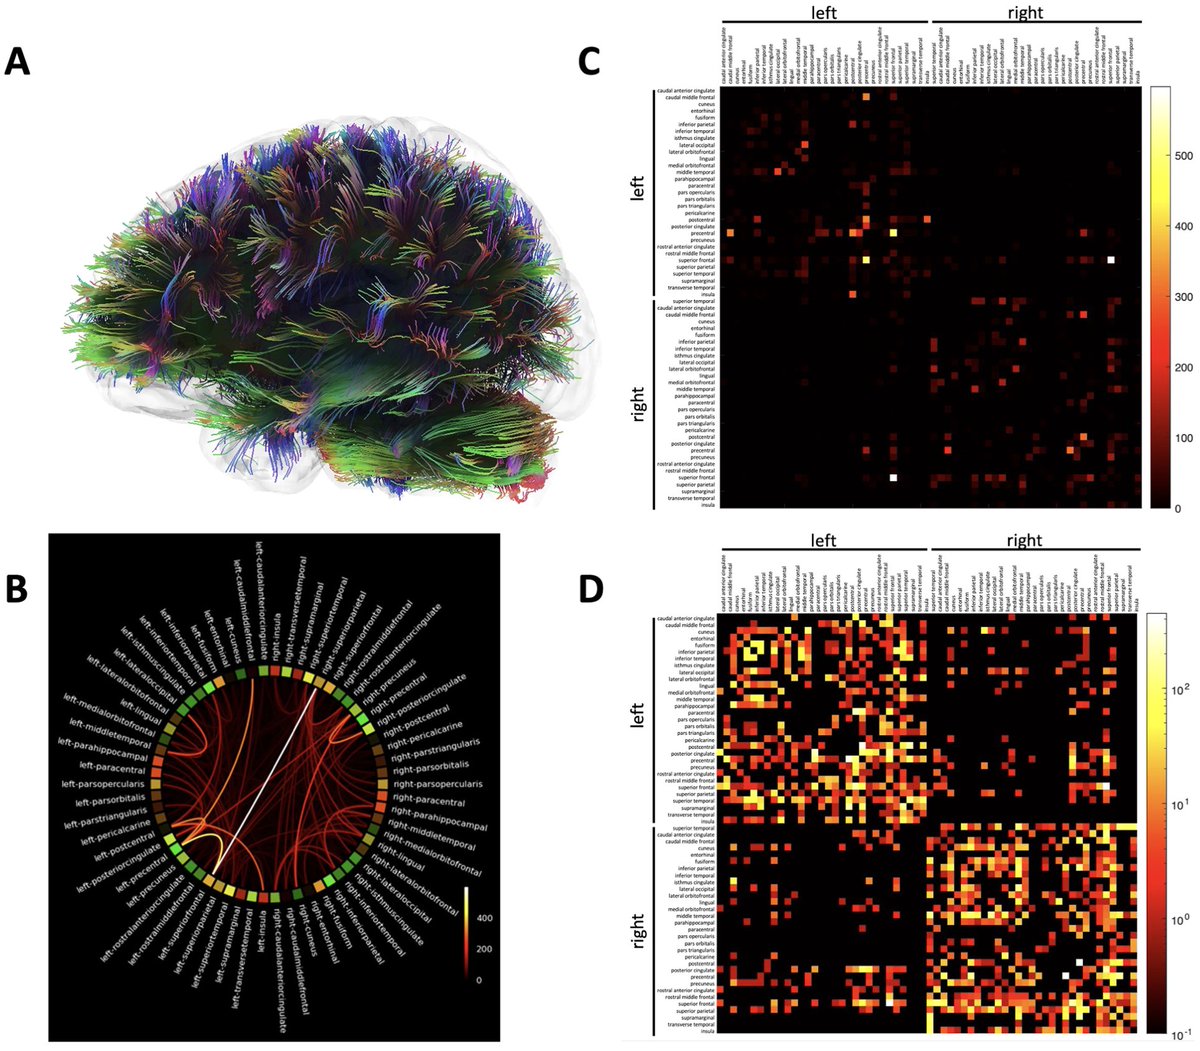 New paper in Imaging Neuroscience by Chuan Huang, Benjamin J. Luft, et al: Graph theory-based analysis reveals neural anatomical network alterations in chronic post-traumatic stress disorder doi.org/10.1162/imag_a…